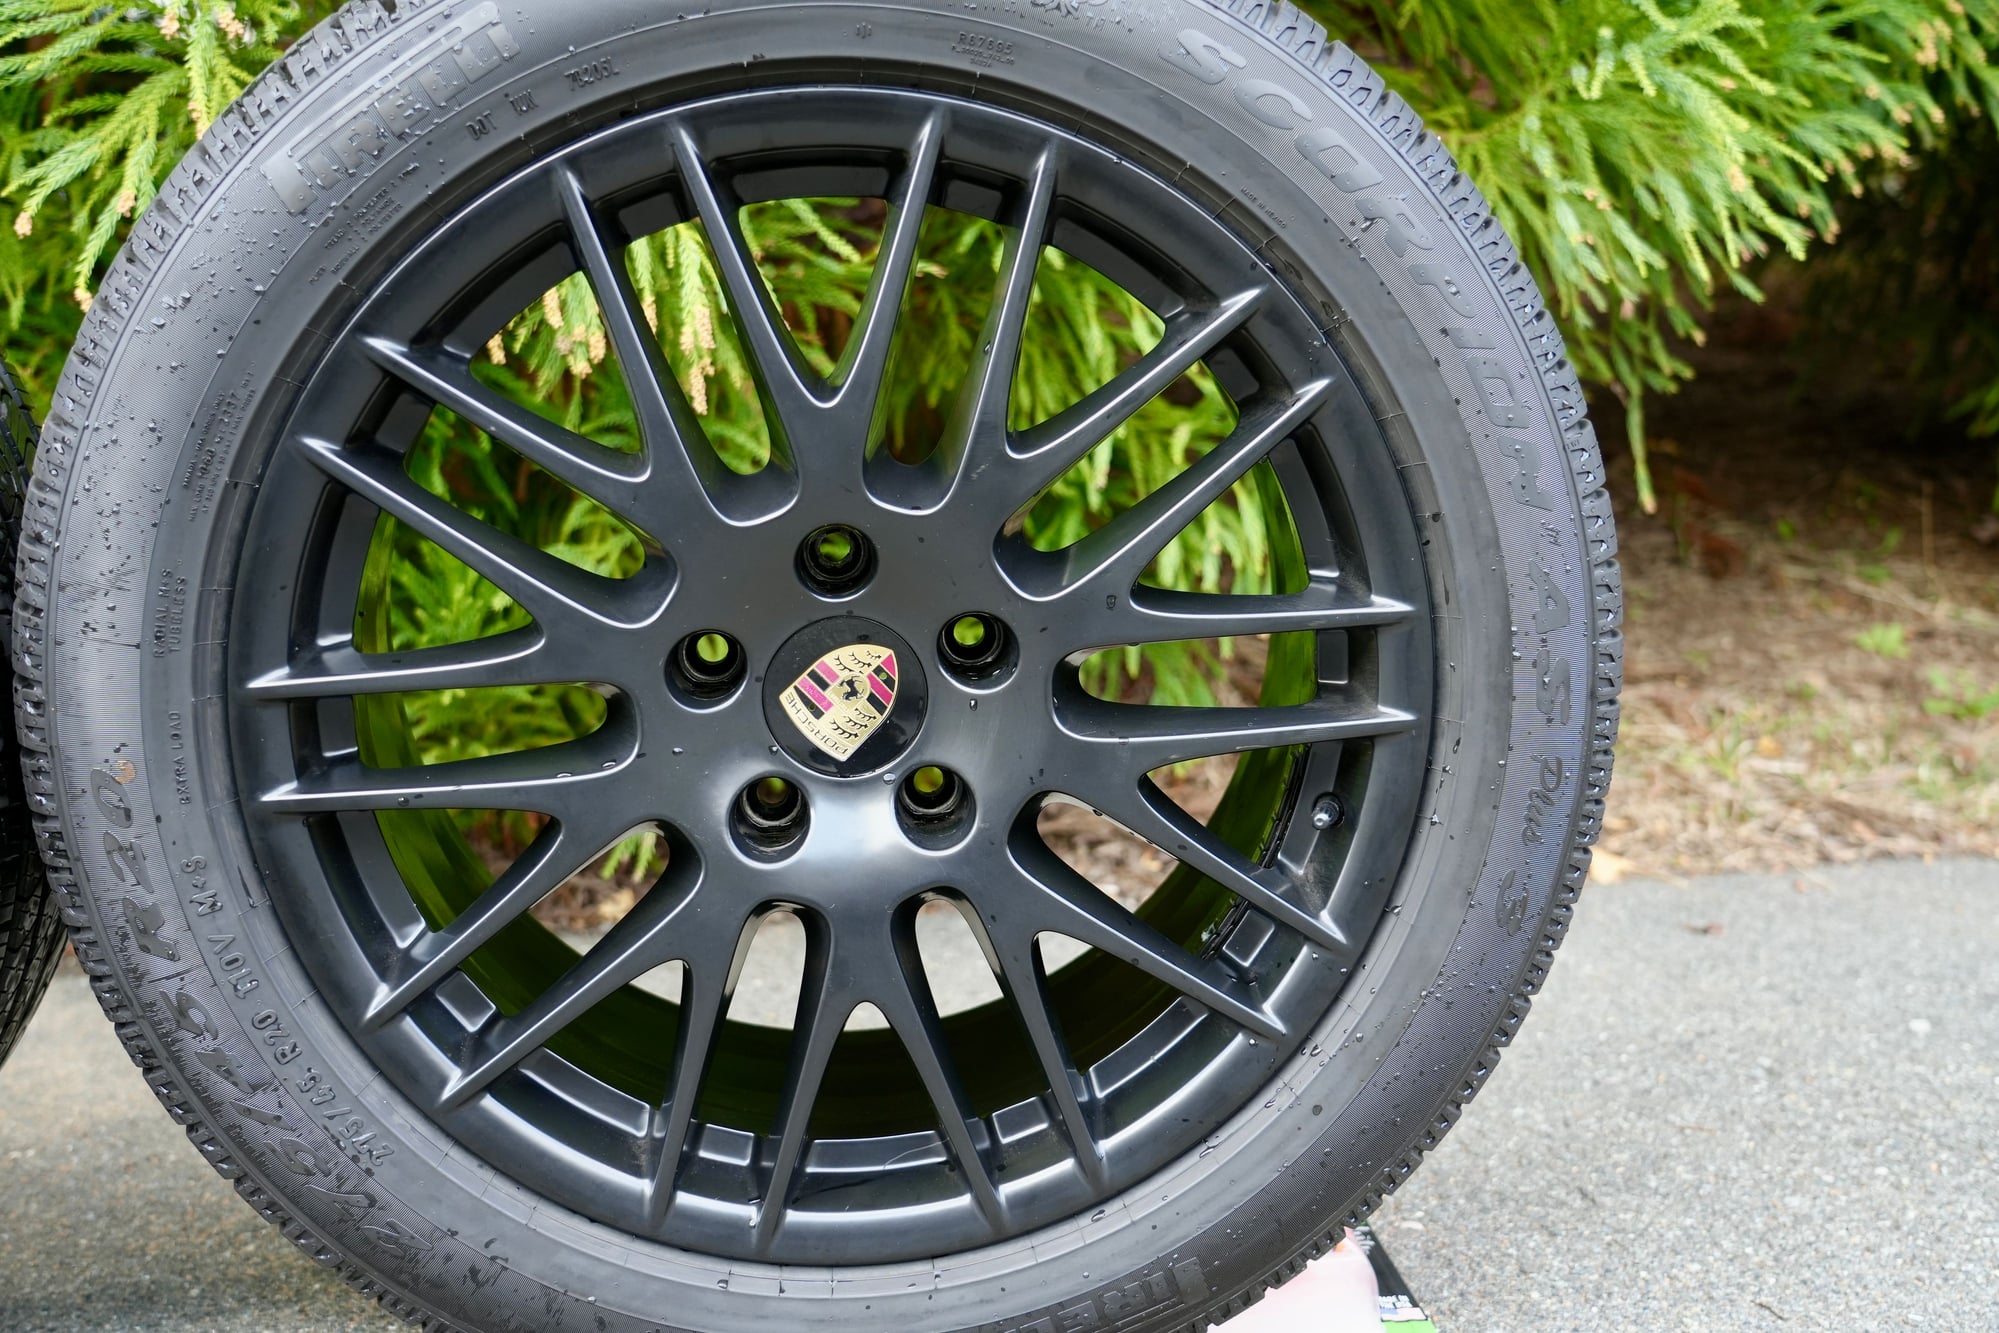 Wheels and Tires/Axles - 20" RS Spyder with Pirelli Scorpion AS plus 3 - Used - 2016 to 2018 Porsche Cayenne - Silver Spring, MD 20906, United States